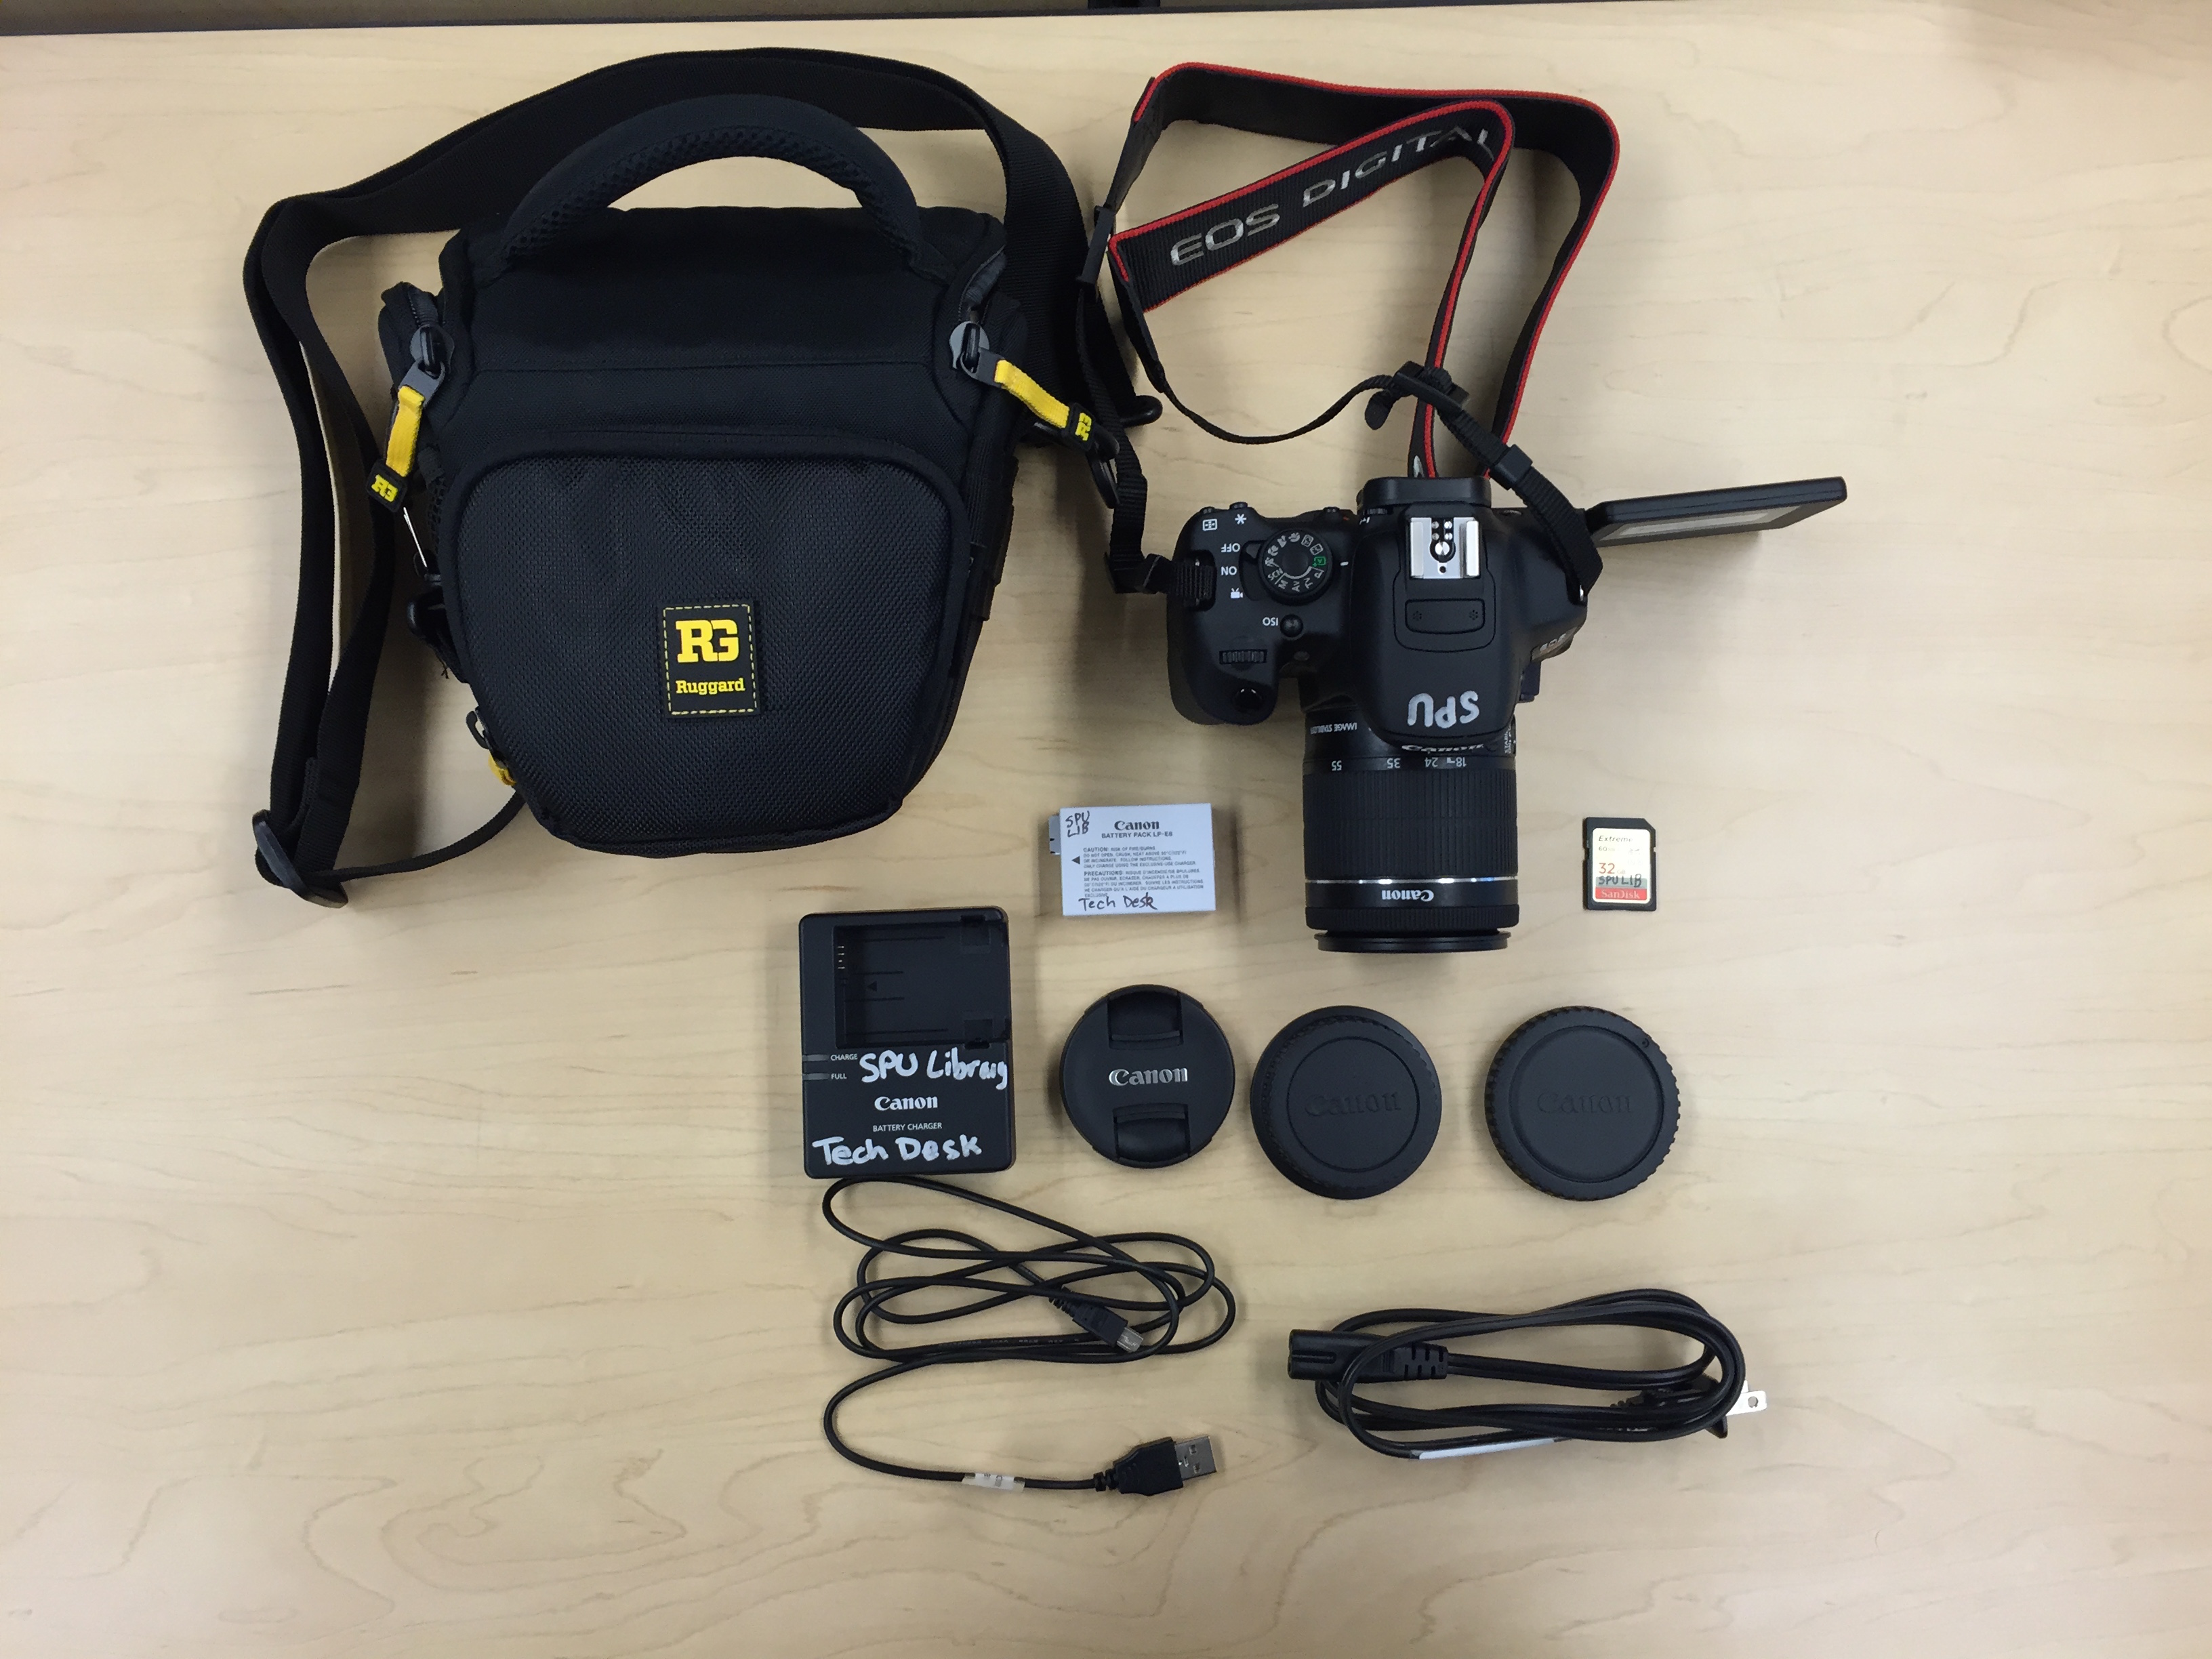 Canon EOS Rebel T5i Camera with shoulder strap, lens, lens cap, 2 lens storage caps, battery charger, battery power cable, battery pack, USB cable, Hunter case, SD card